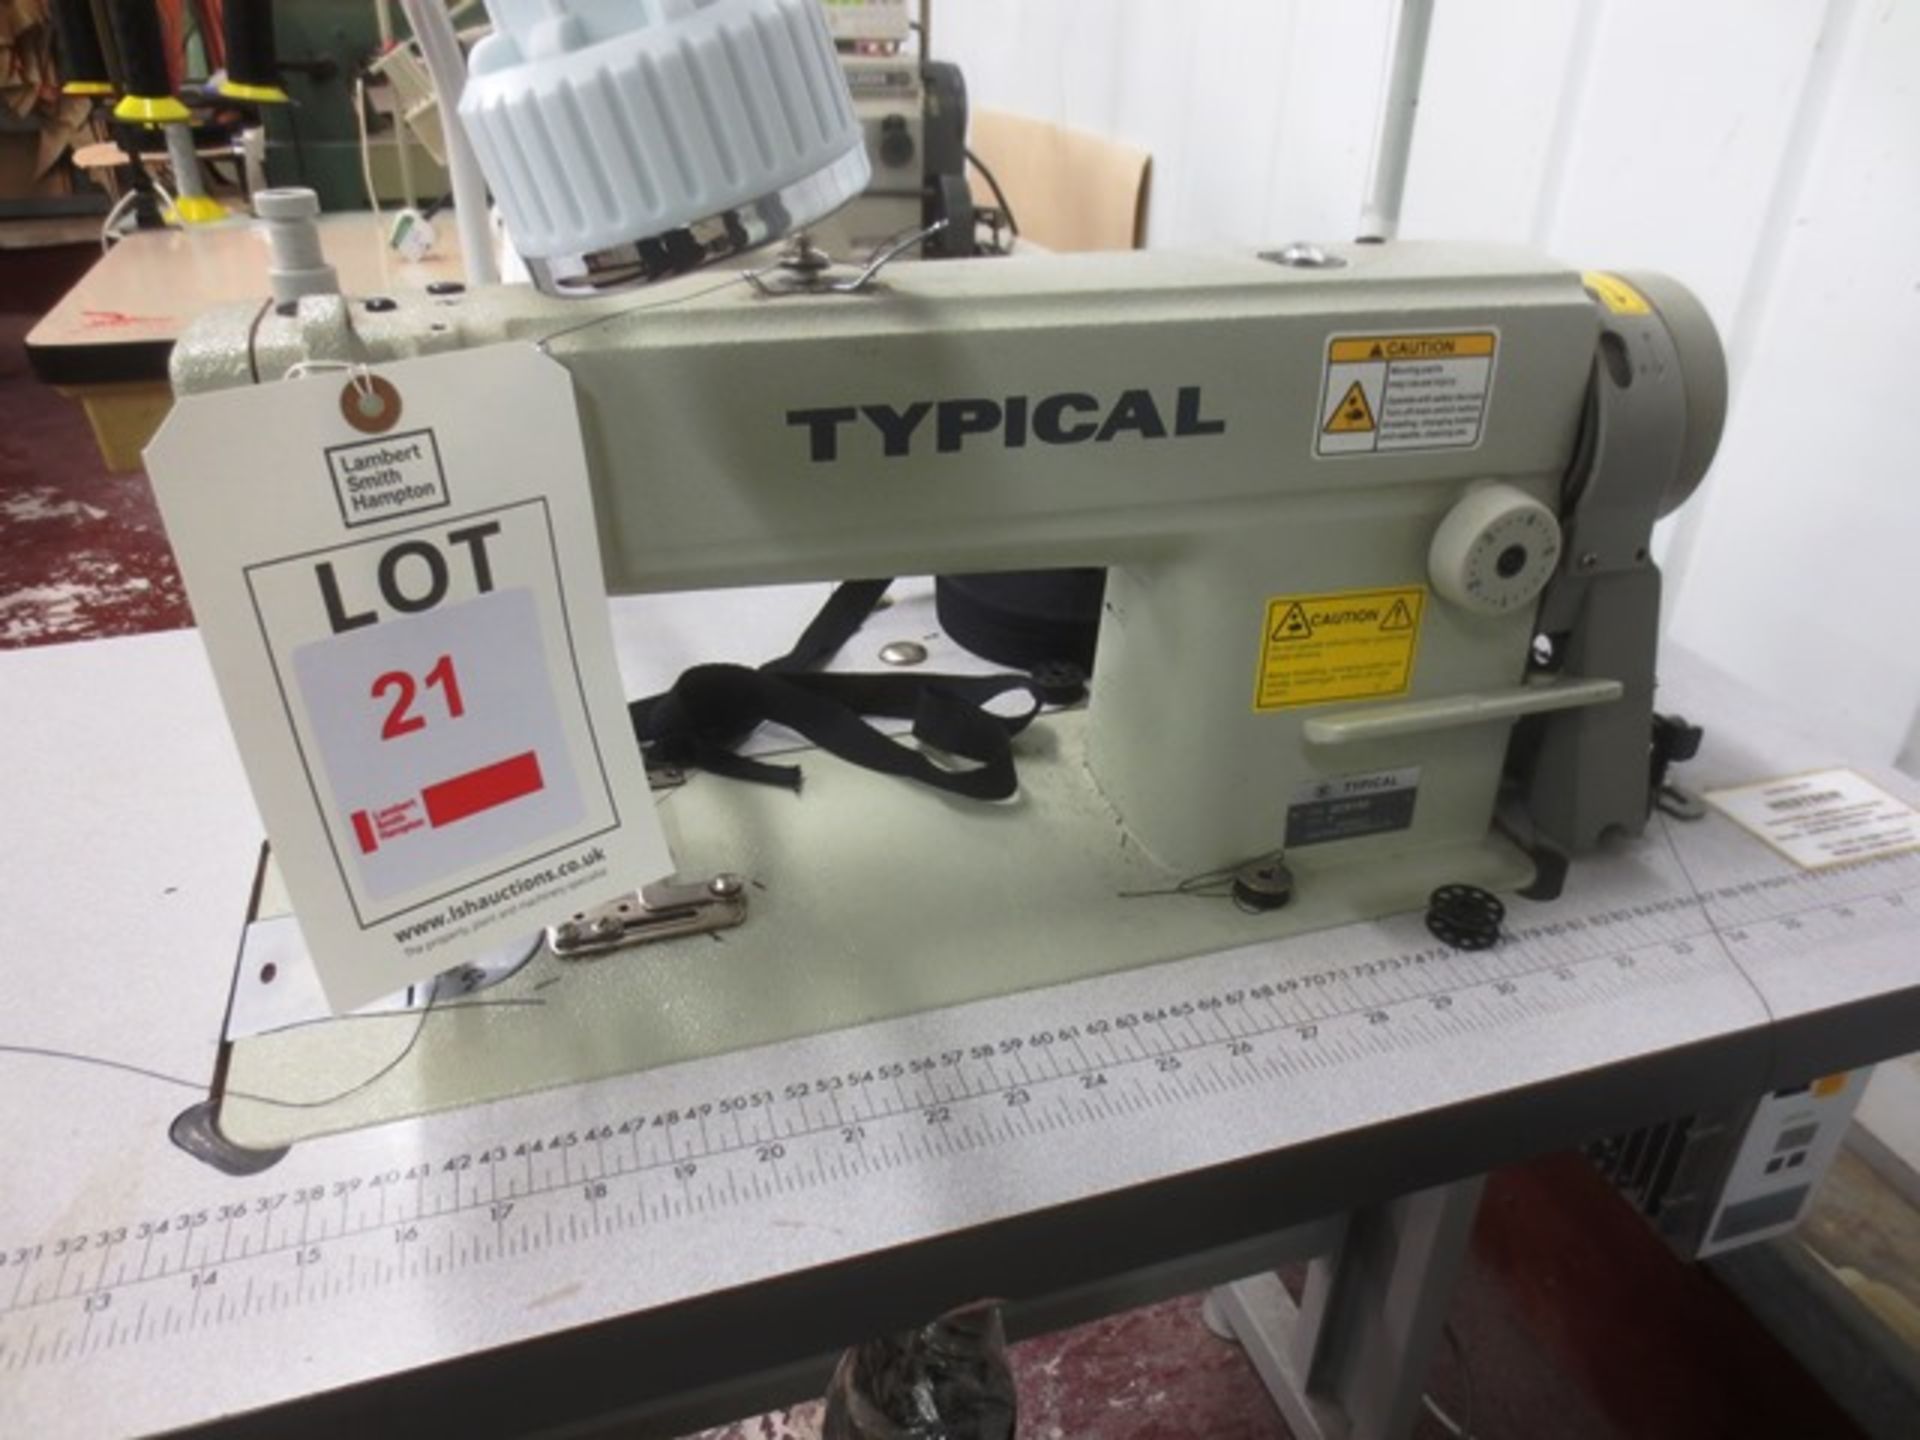 Typical GC6160 flat bed single needle sewing machine, serial no: 220300077, ZJTZ-LH control - Image 2 of 2